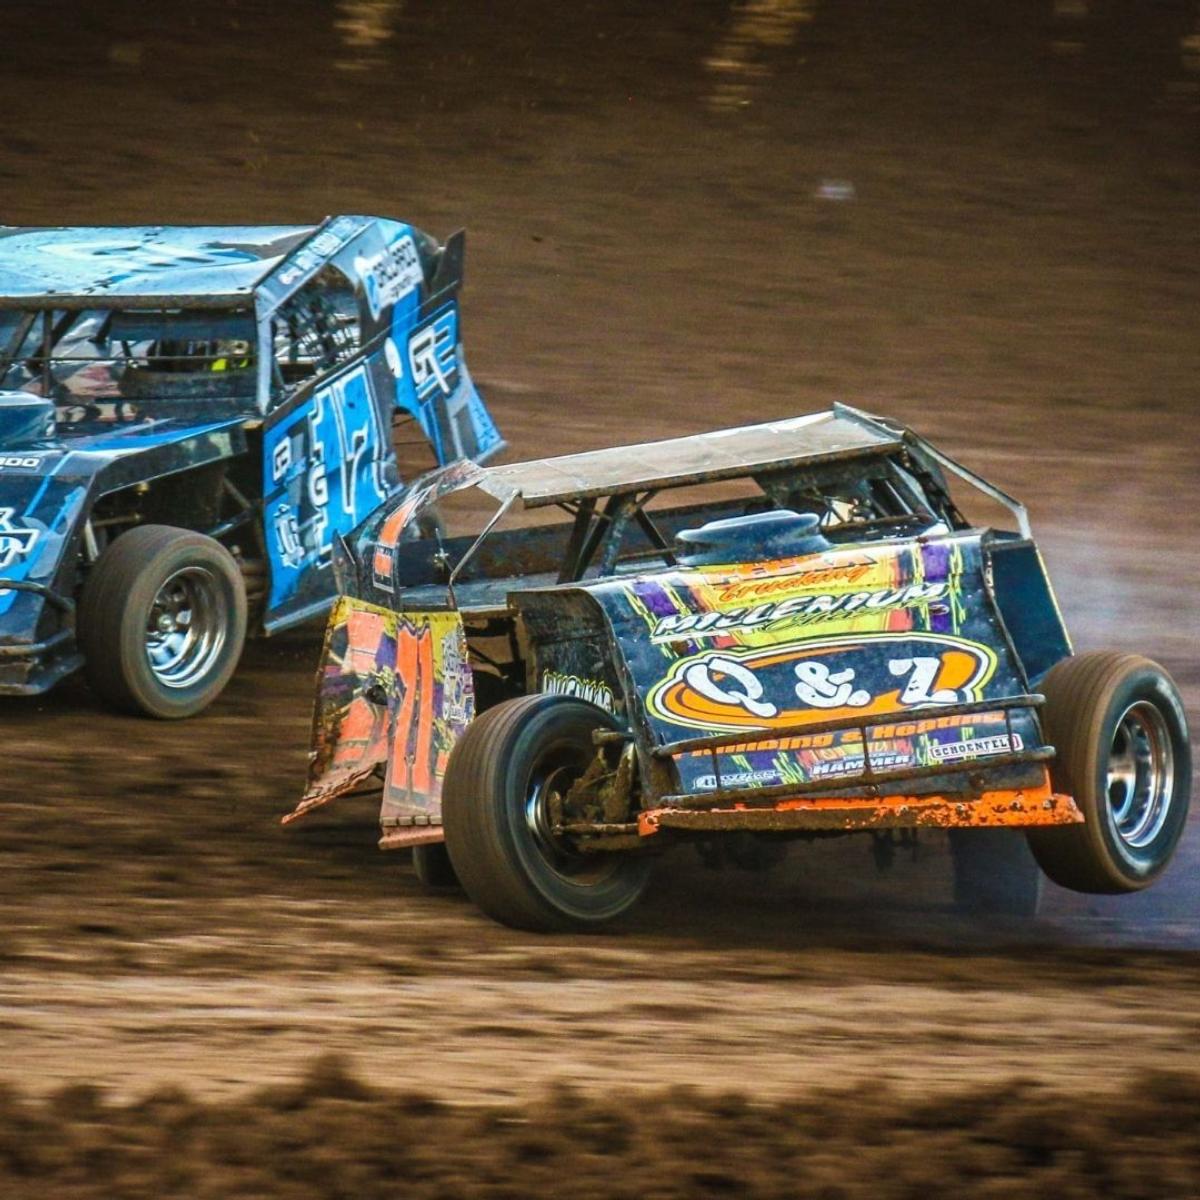 New Bristol Dirt Nationals event coming to BMS March 15-20 News Media Bristol Motor Speedway